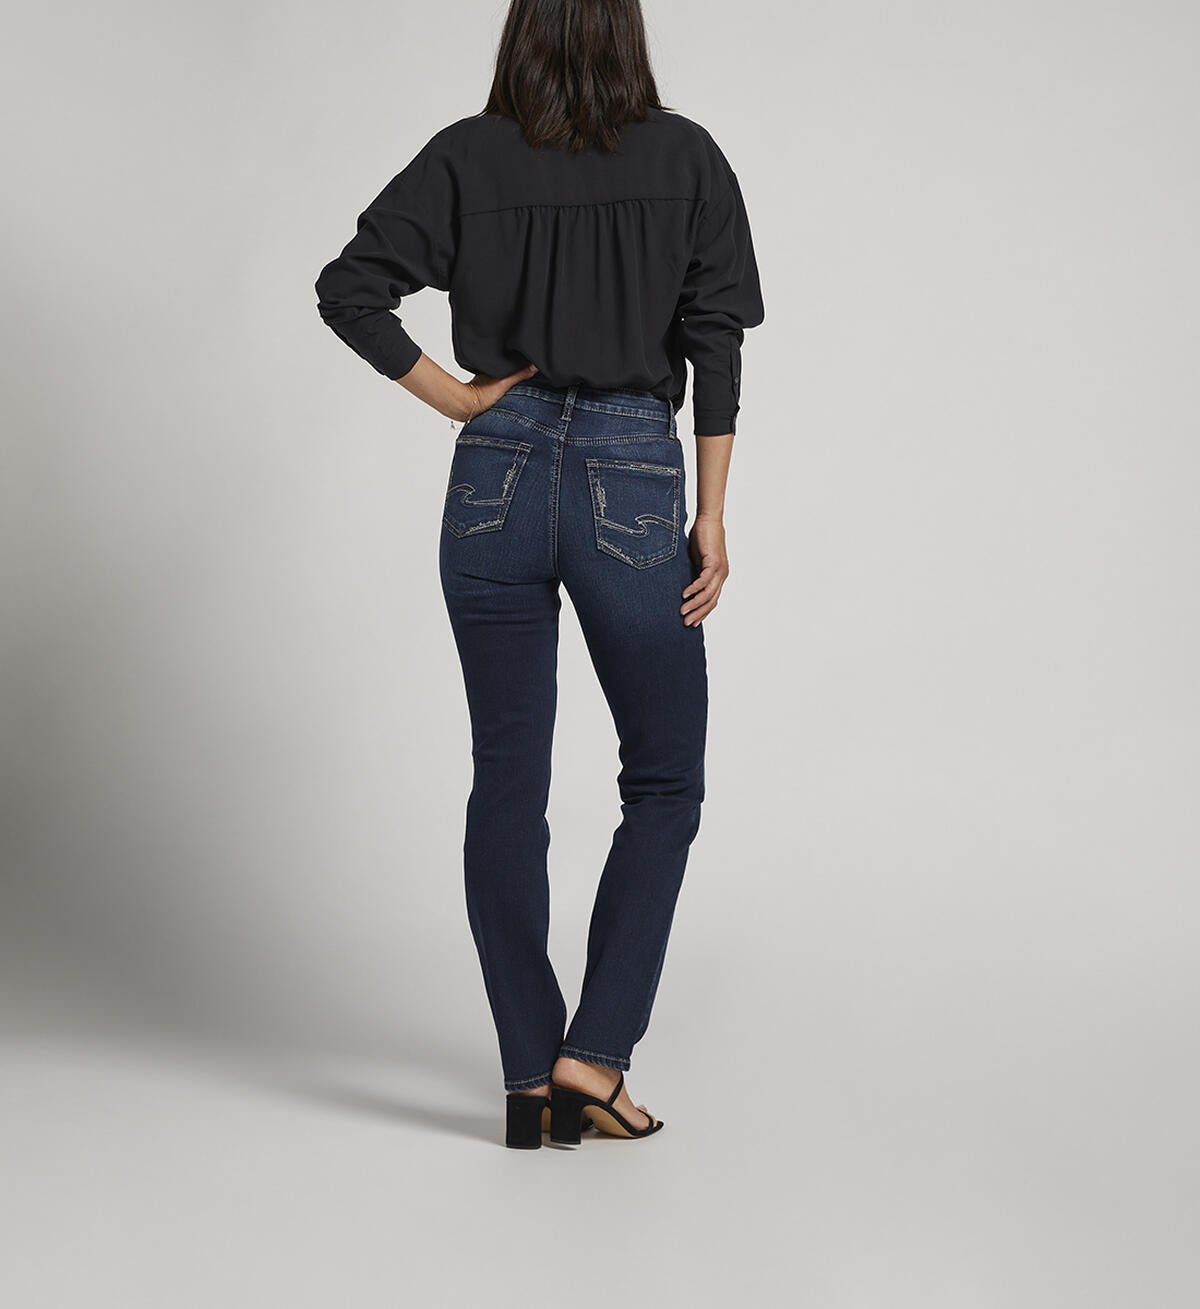 SILVER JEANS-Avery High Rise Straight Leg